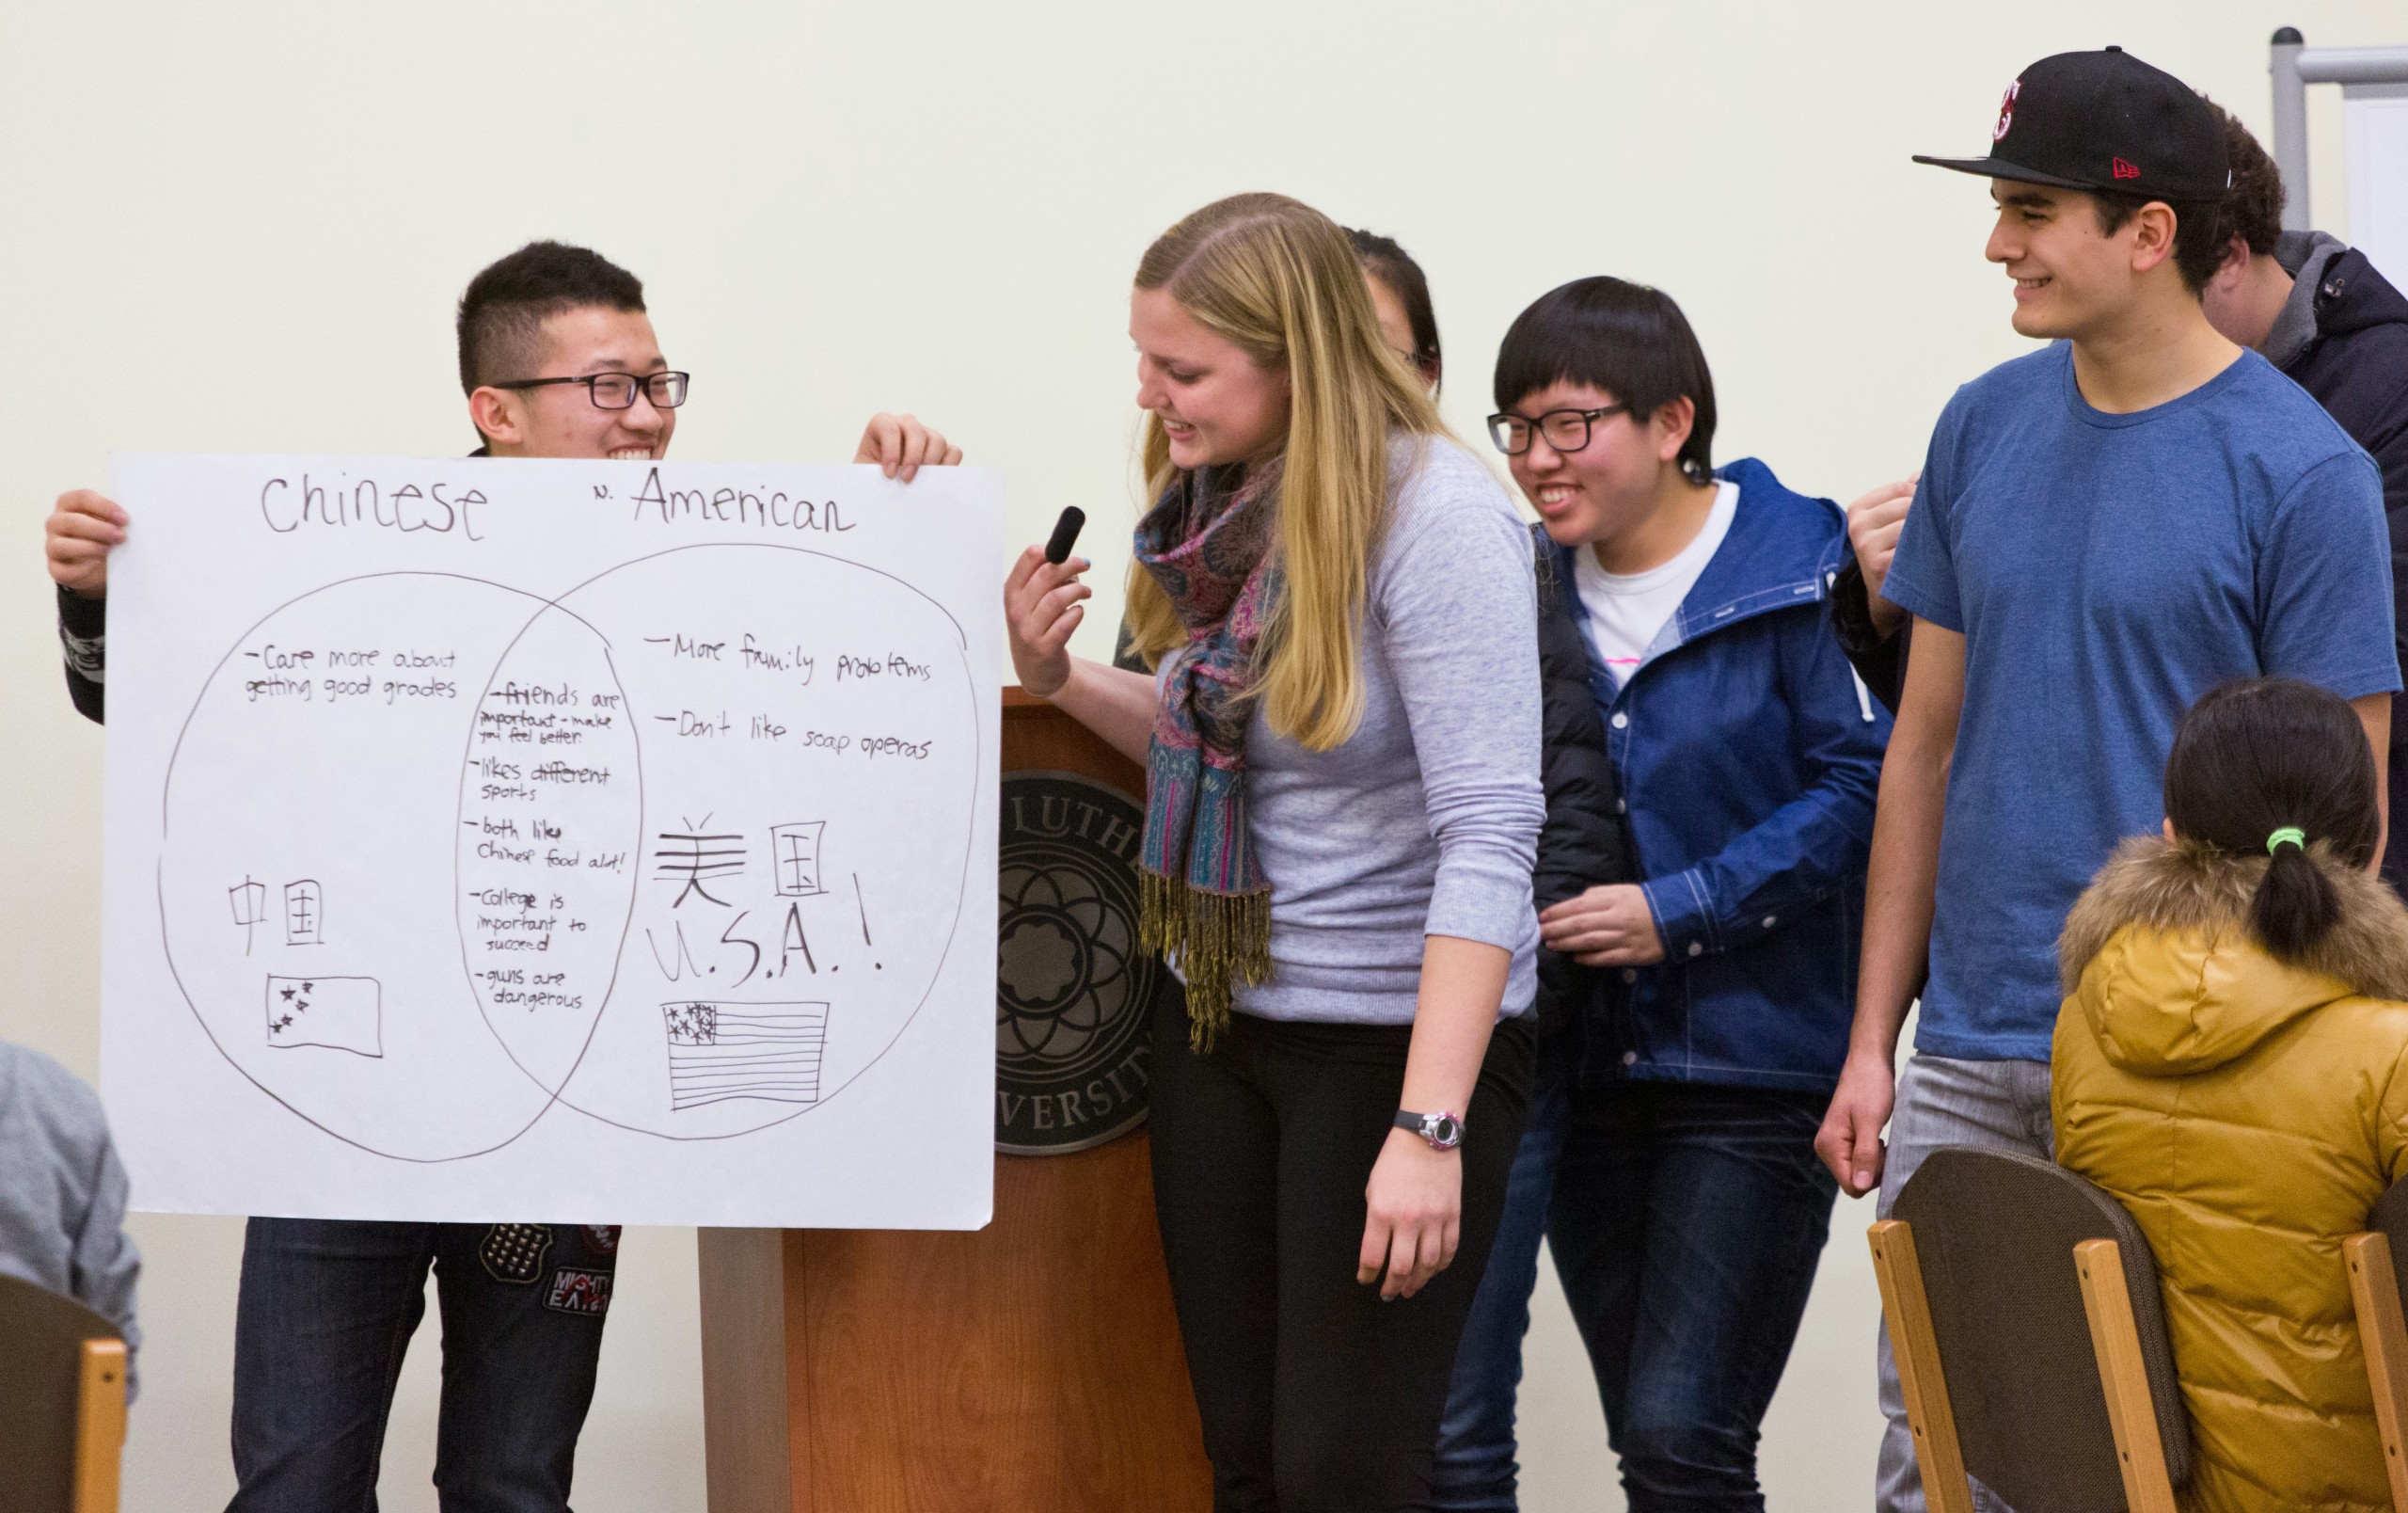 Students discuss the results of their cultural-exchange work. (Photo: John Froschauer / PLU )